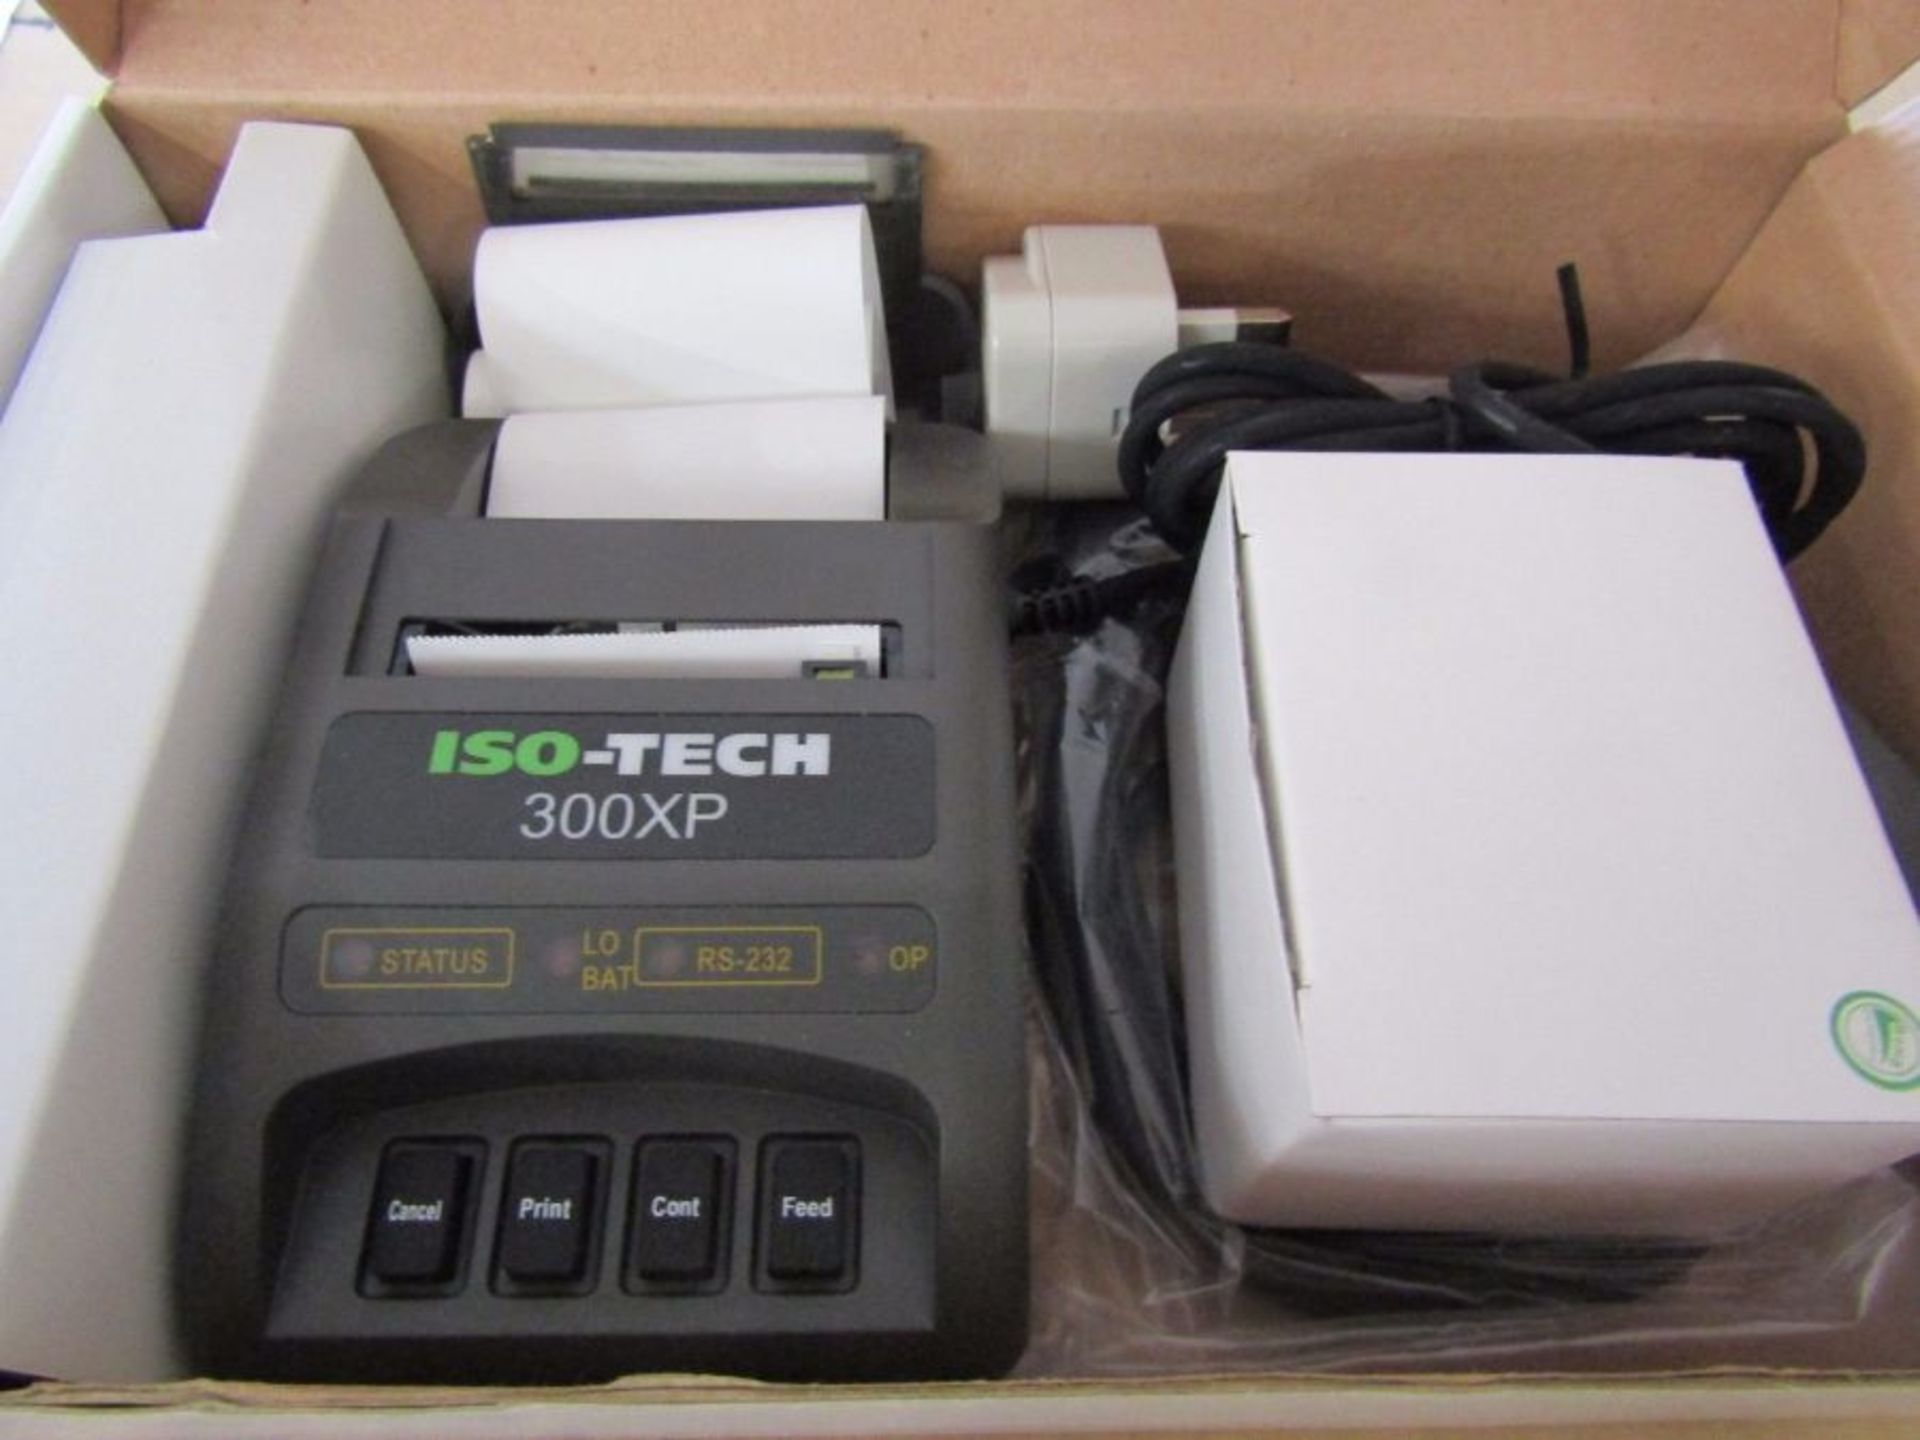 NEW ISOTECH 300XP Thermal Printer - Portable